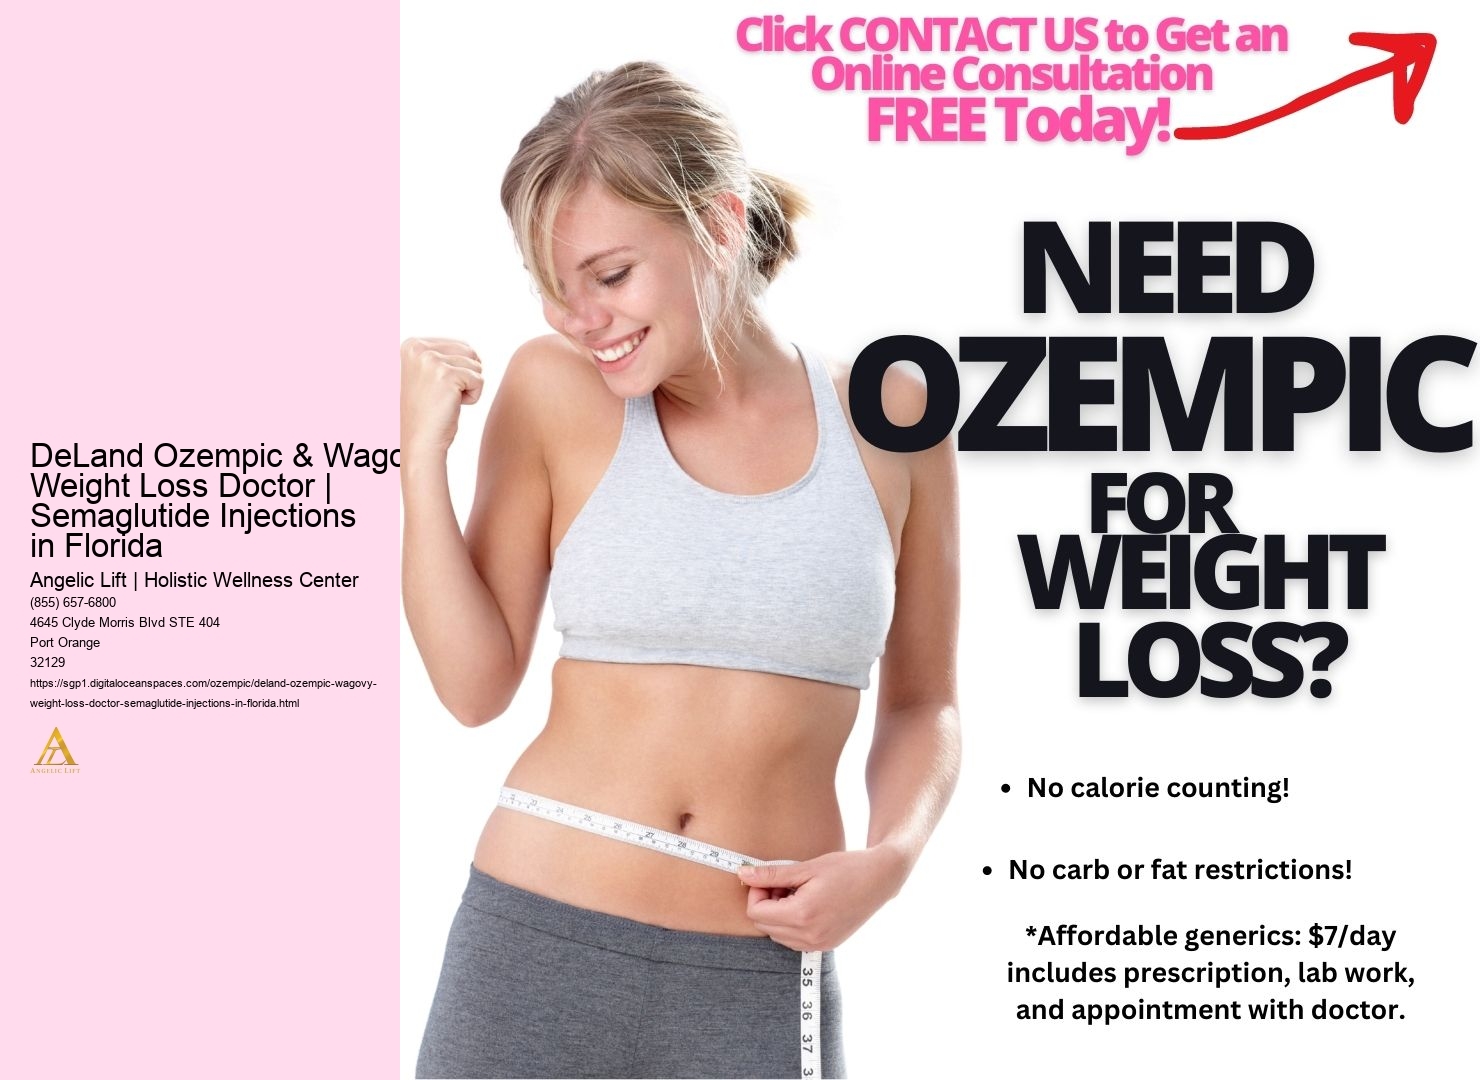 DeLand Ozempic & Wagovy Weight Loss Doctor | Semaglutide Injections in Florida